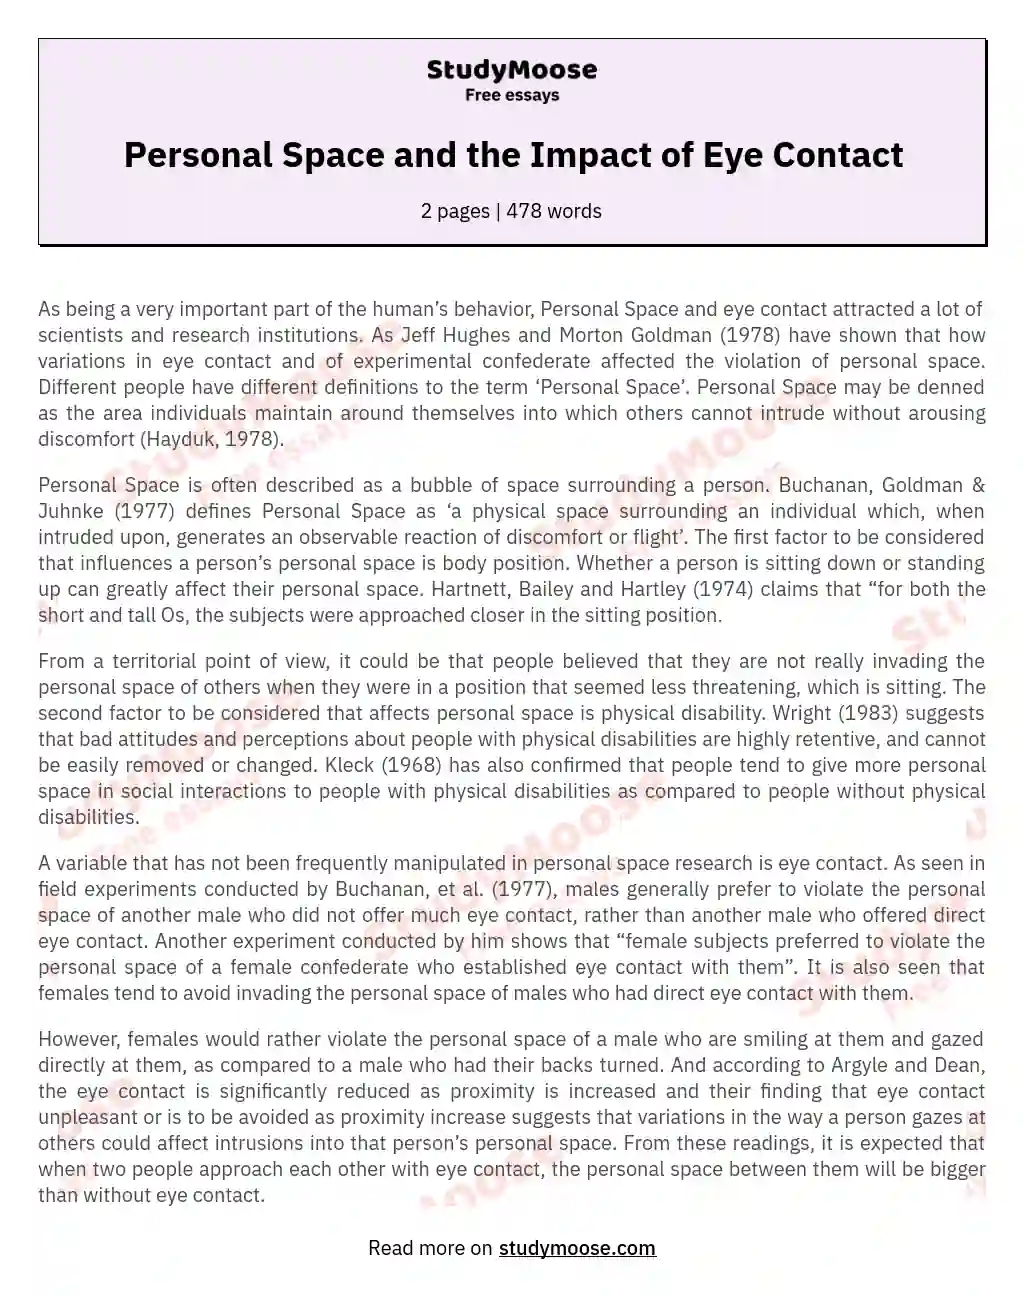 Personal Space and the Impact of Eye Contact essay